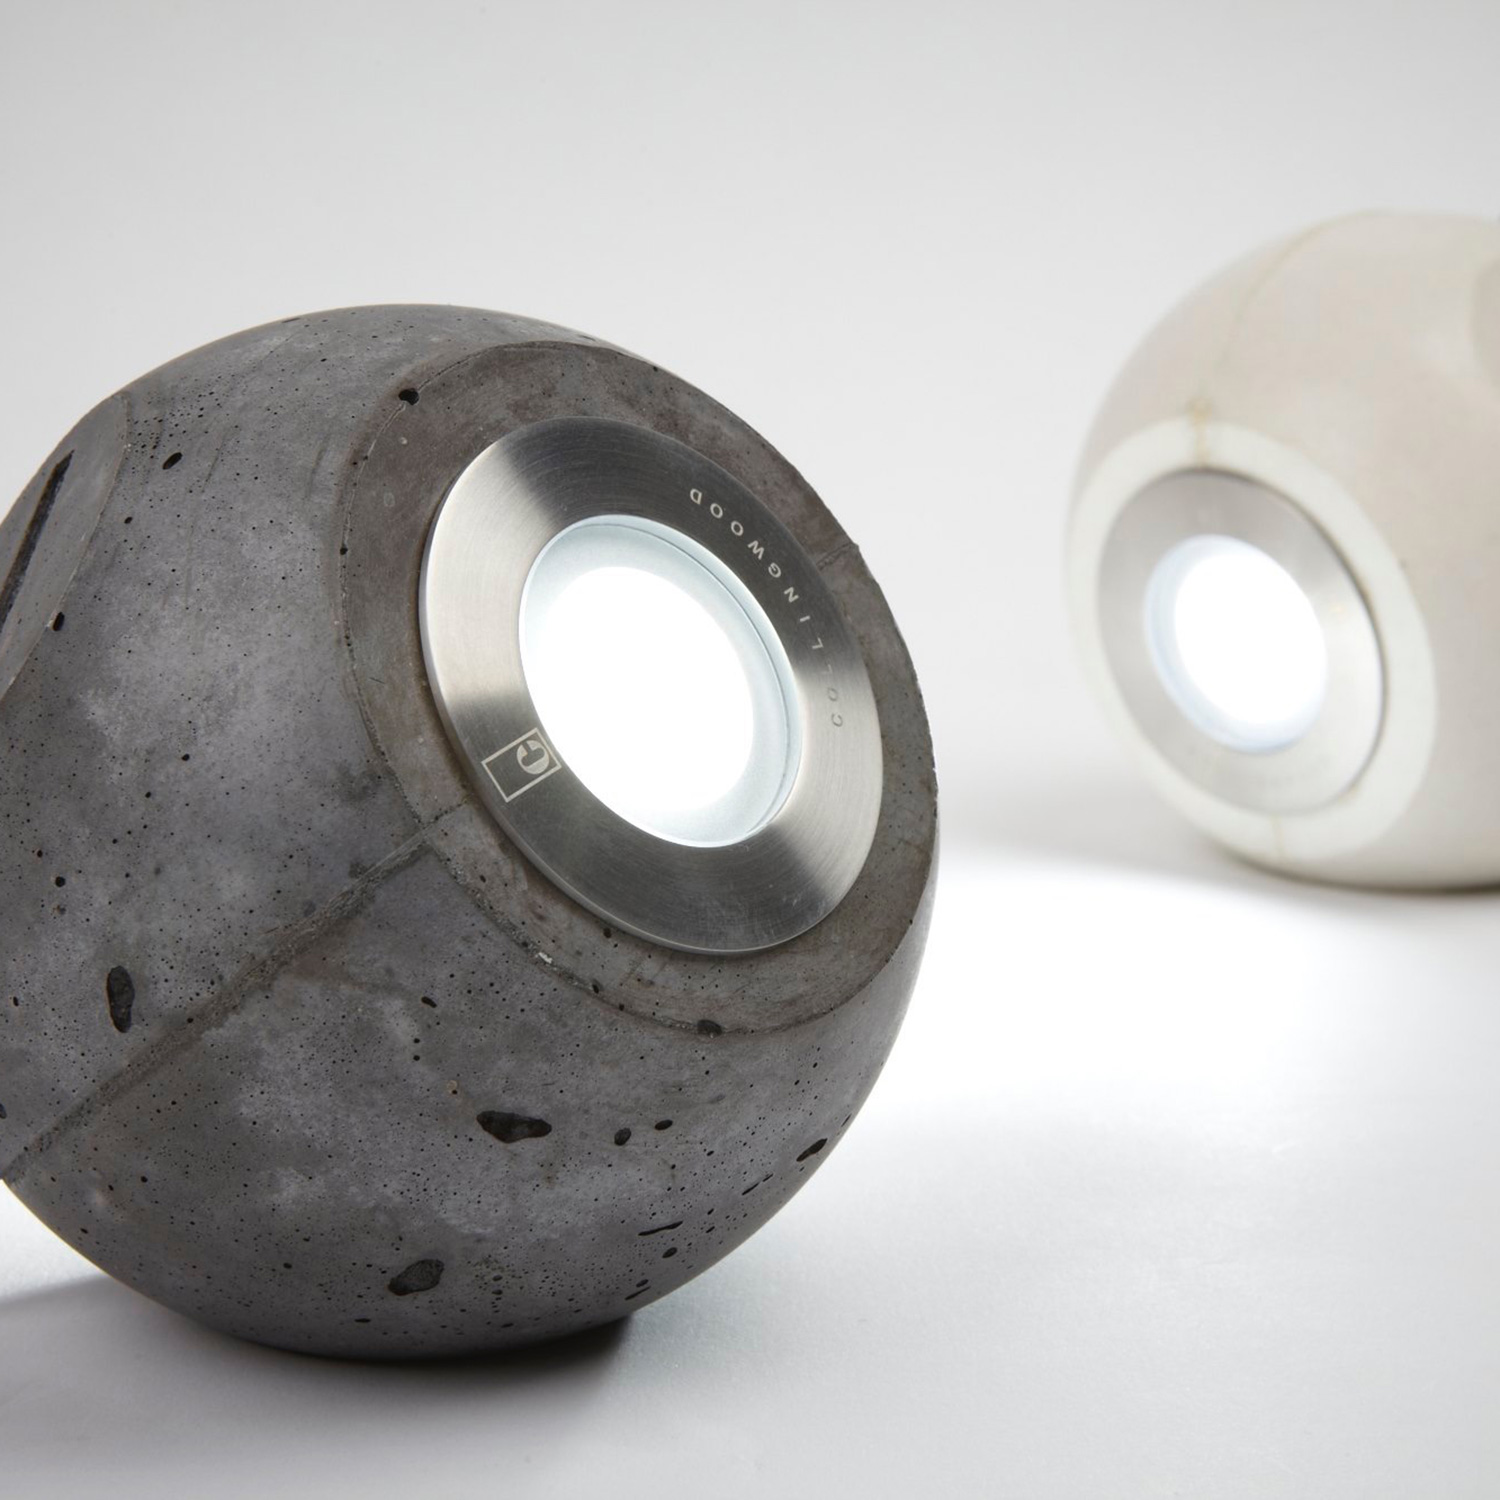 Conscious Forms - mini orb concrete light 4 angled light positions led fitting ambient lighting